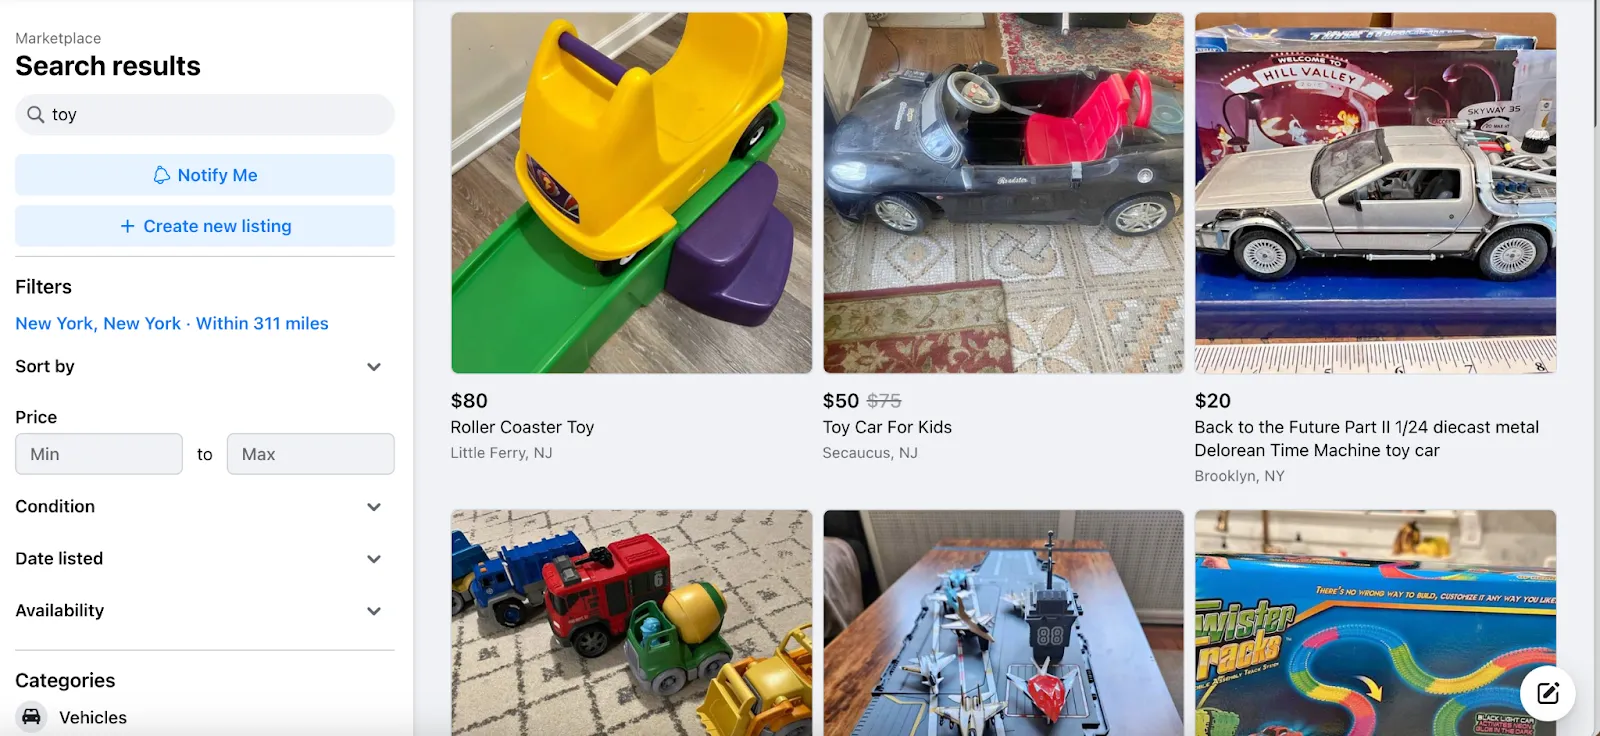 best selling items on Facebook Marketplace - toy